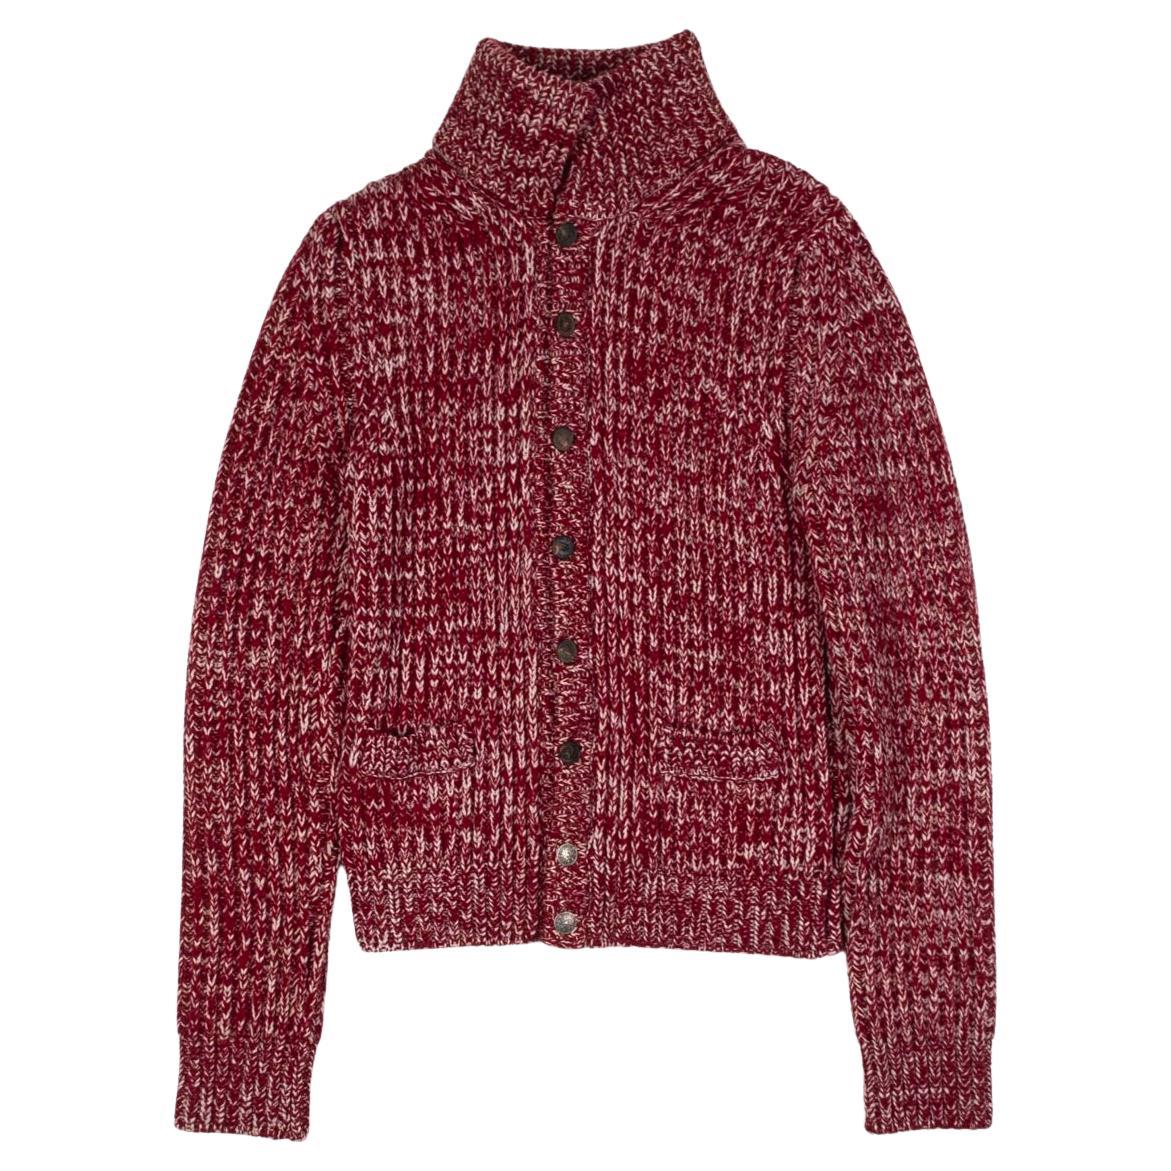 Dolce&Gabbana Wool Cardigan Sweater Men Heavy Knitted Size 50IT (Large), S403 For Sale